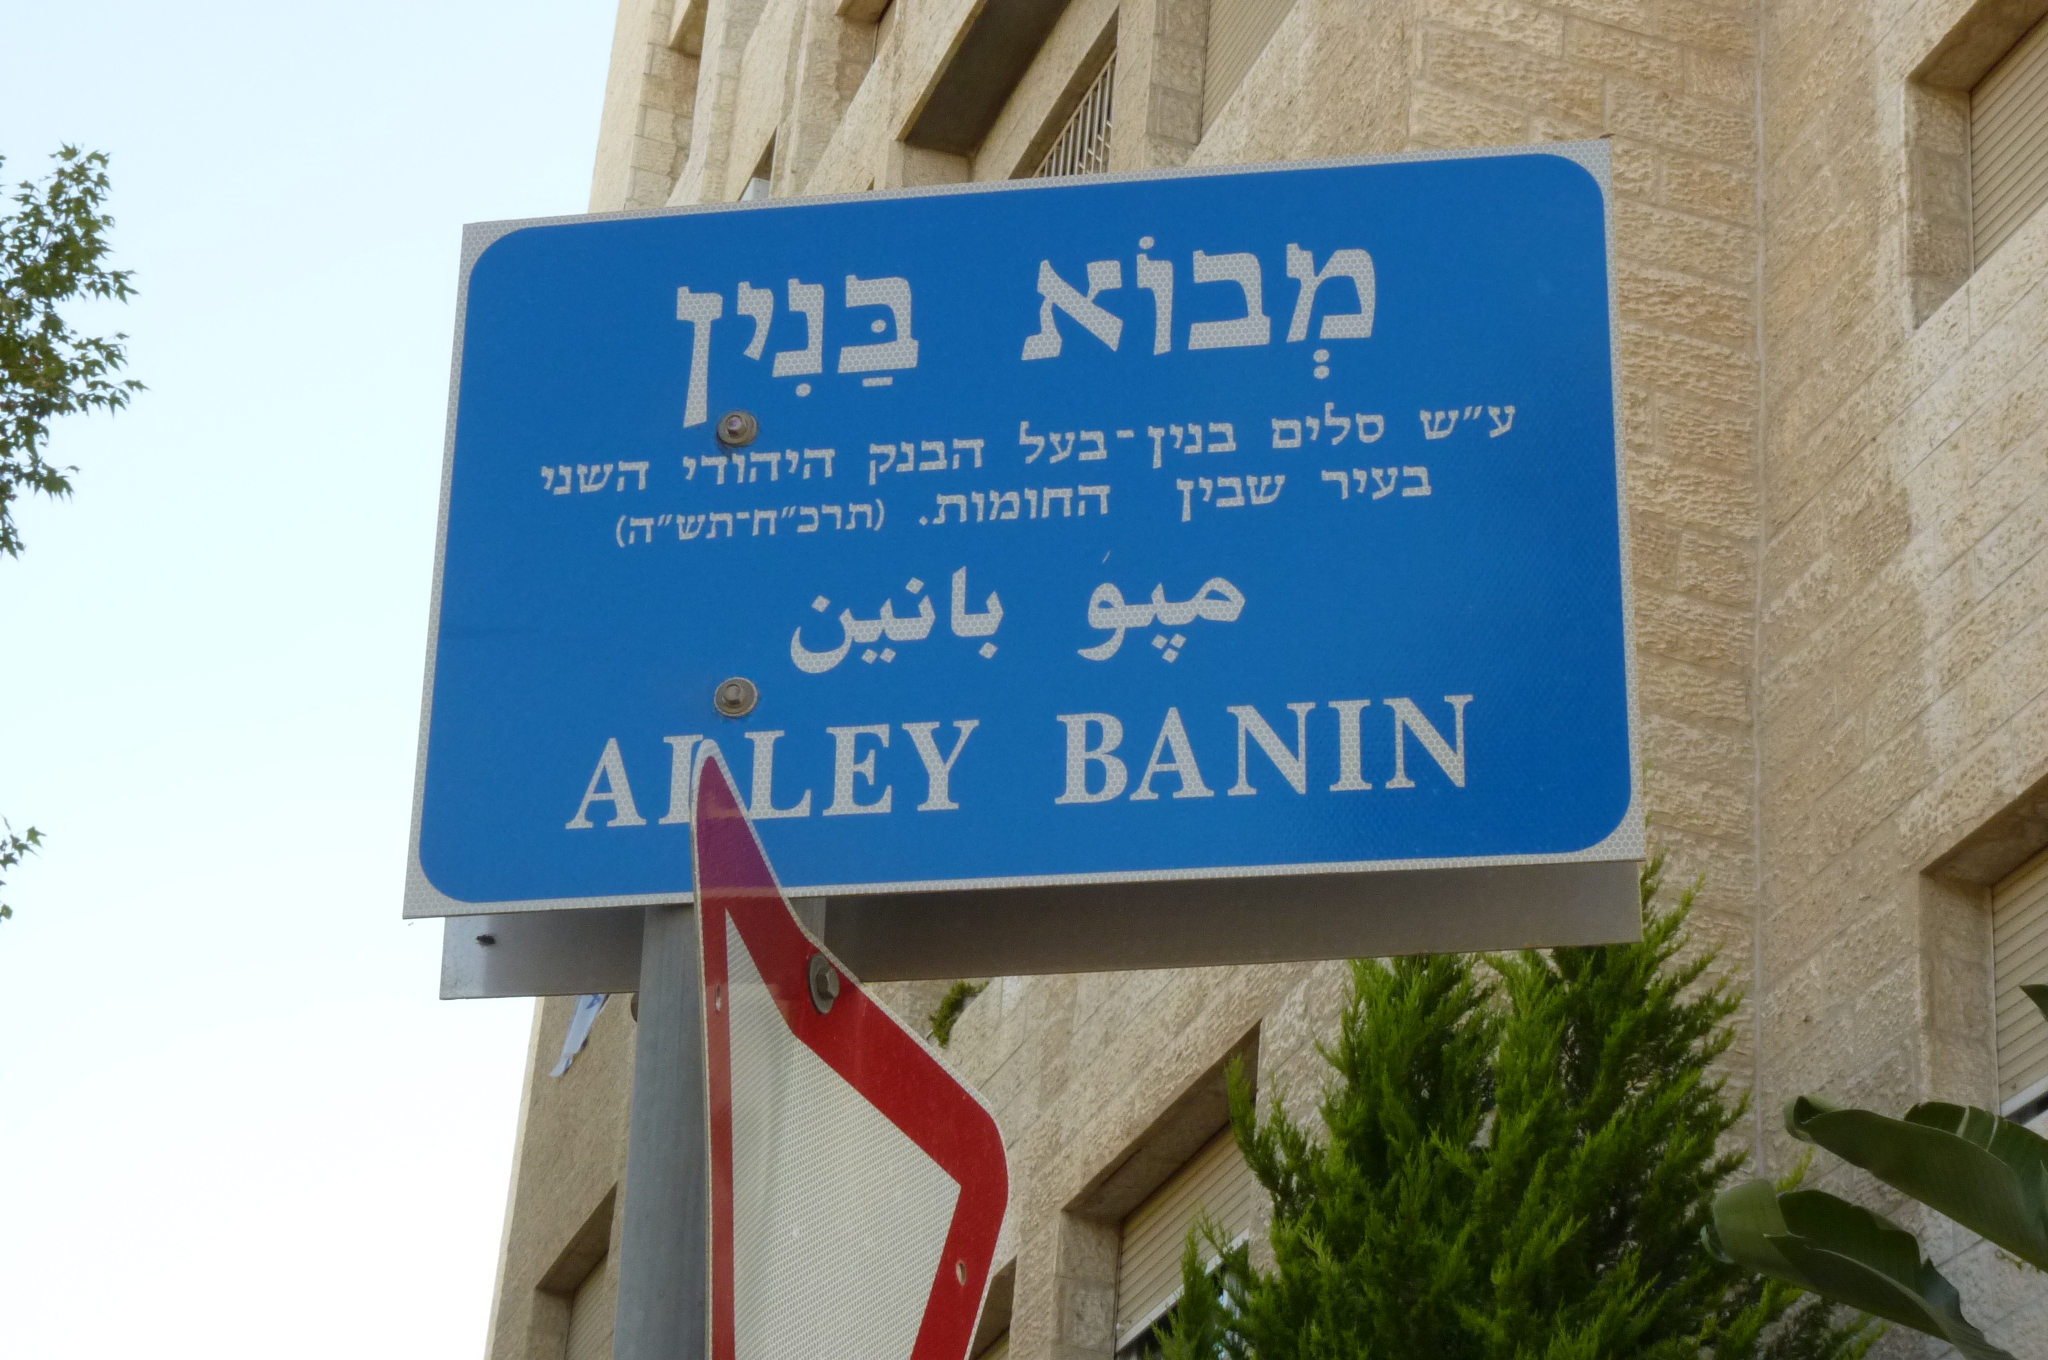 an image of a street sign with two languages